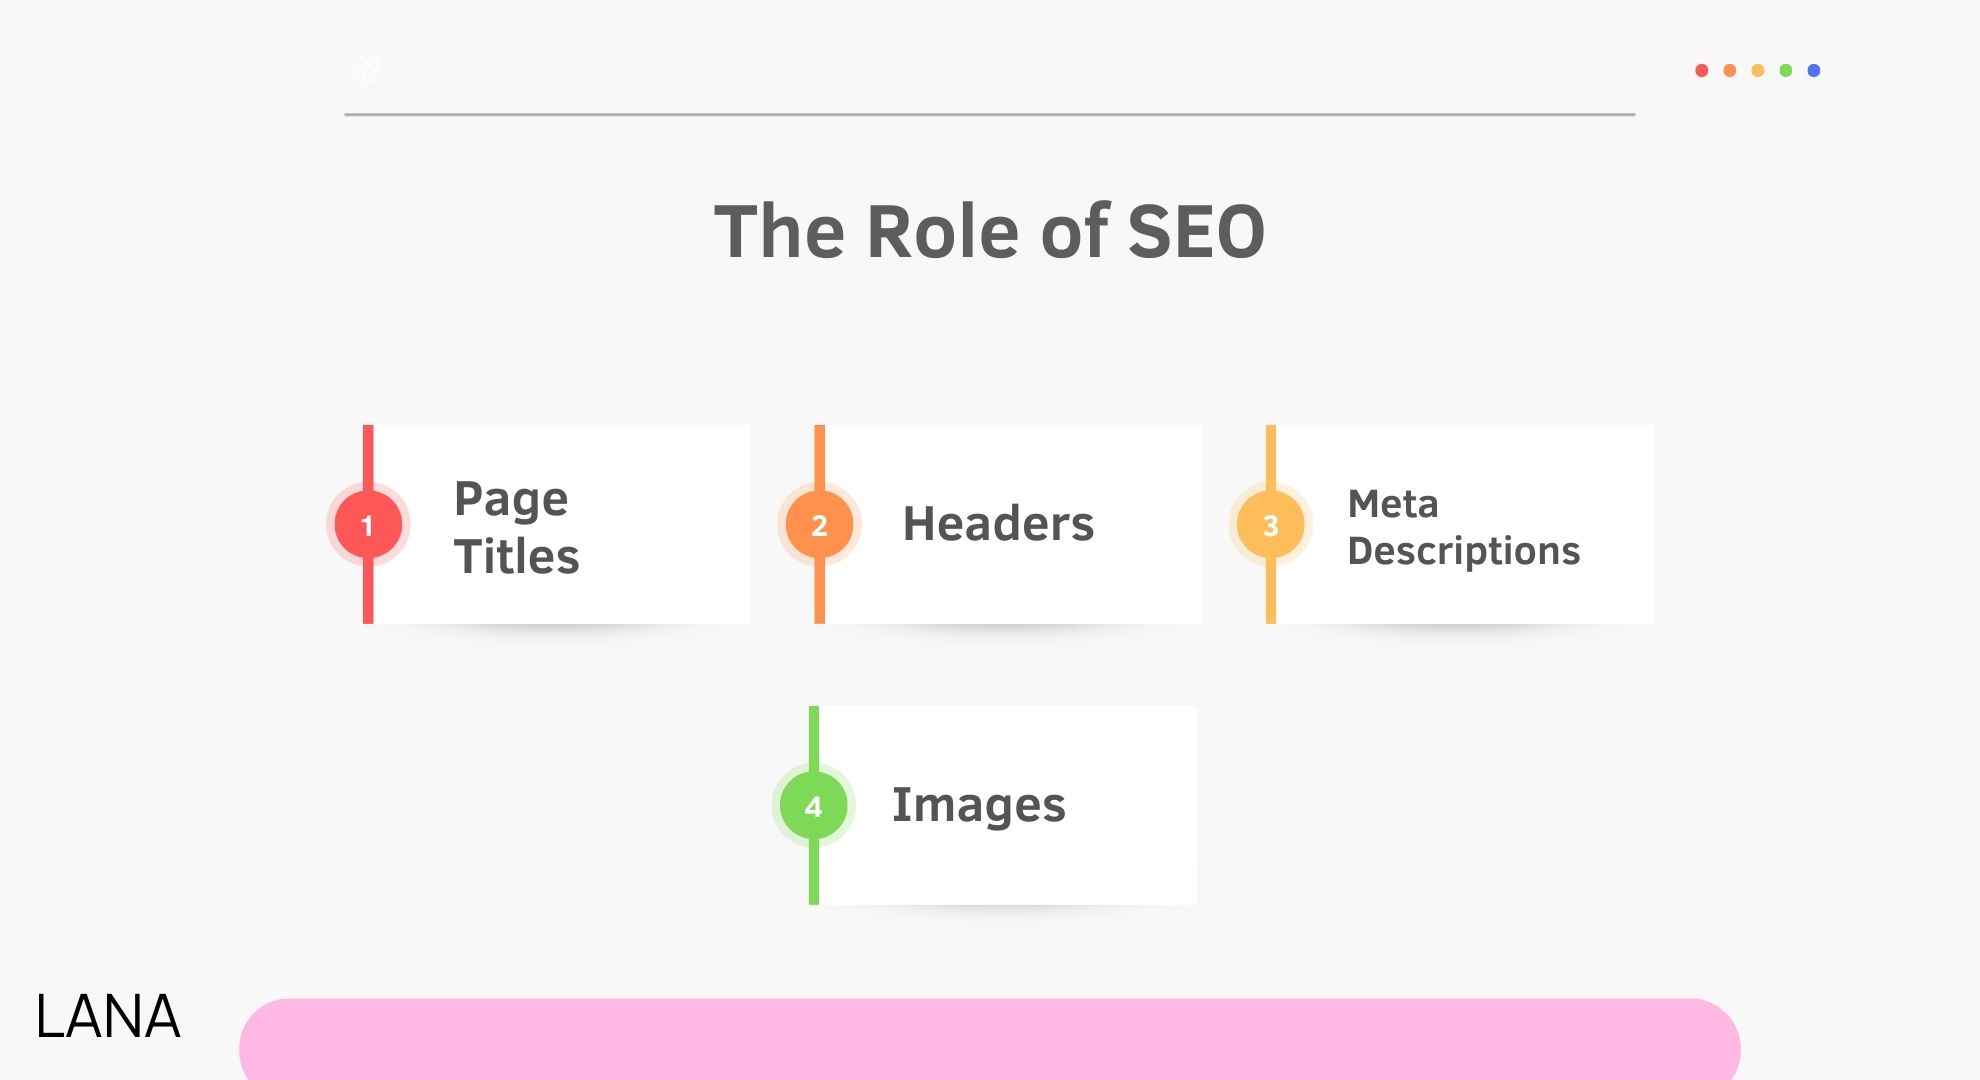 The Role of SEO